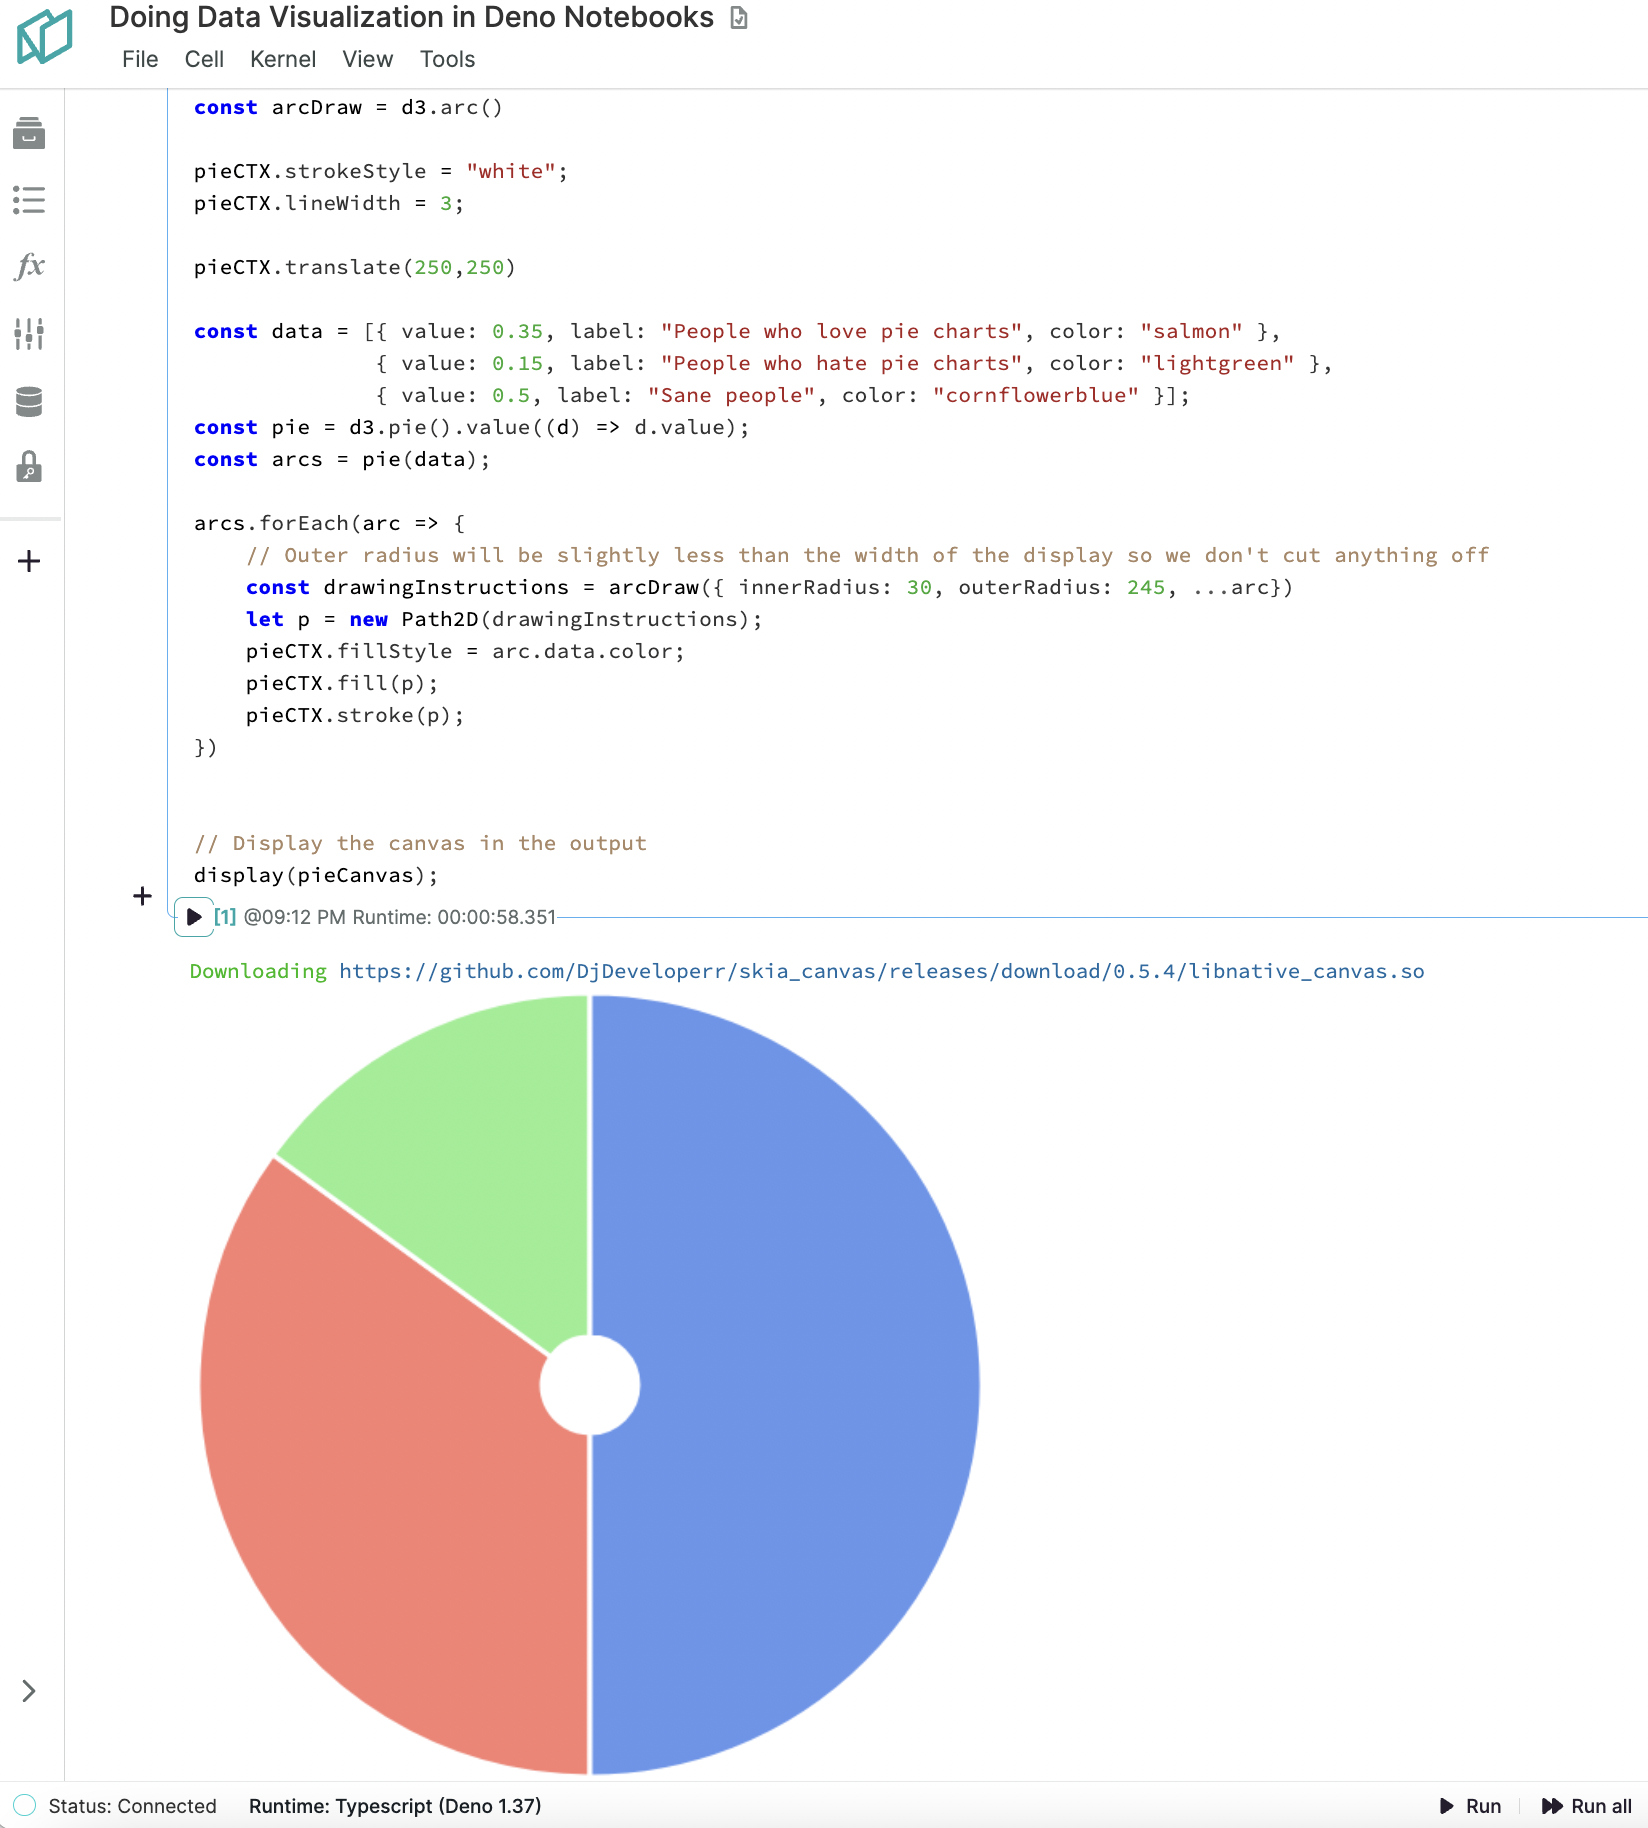 D3 example with Deno and Jupyter